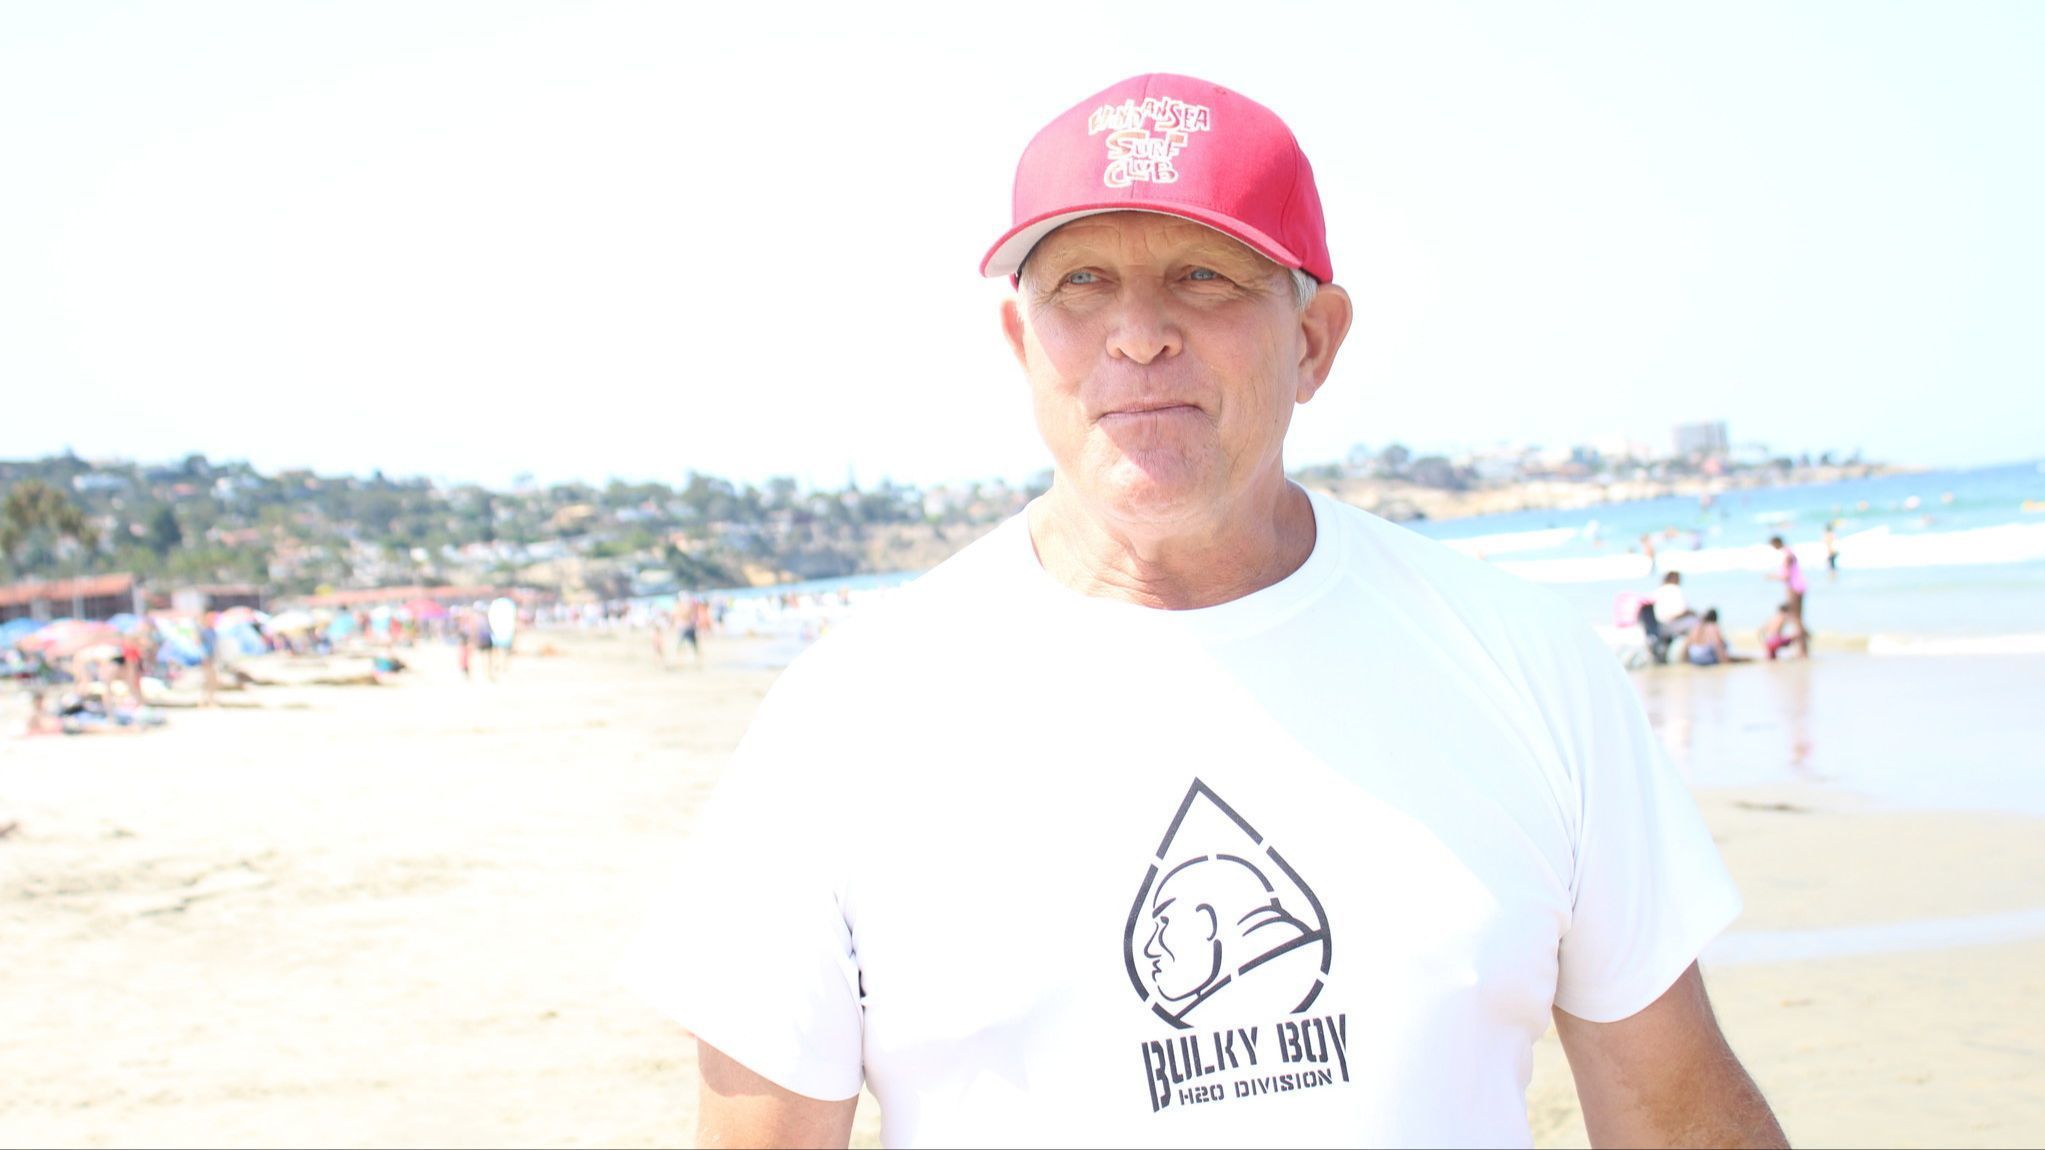 WindanSea Surf Club president Bill Fitzmaurice reflects on his club's history during its latest Day at the Beach charity event at La Jolla Shores.